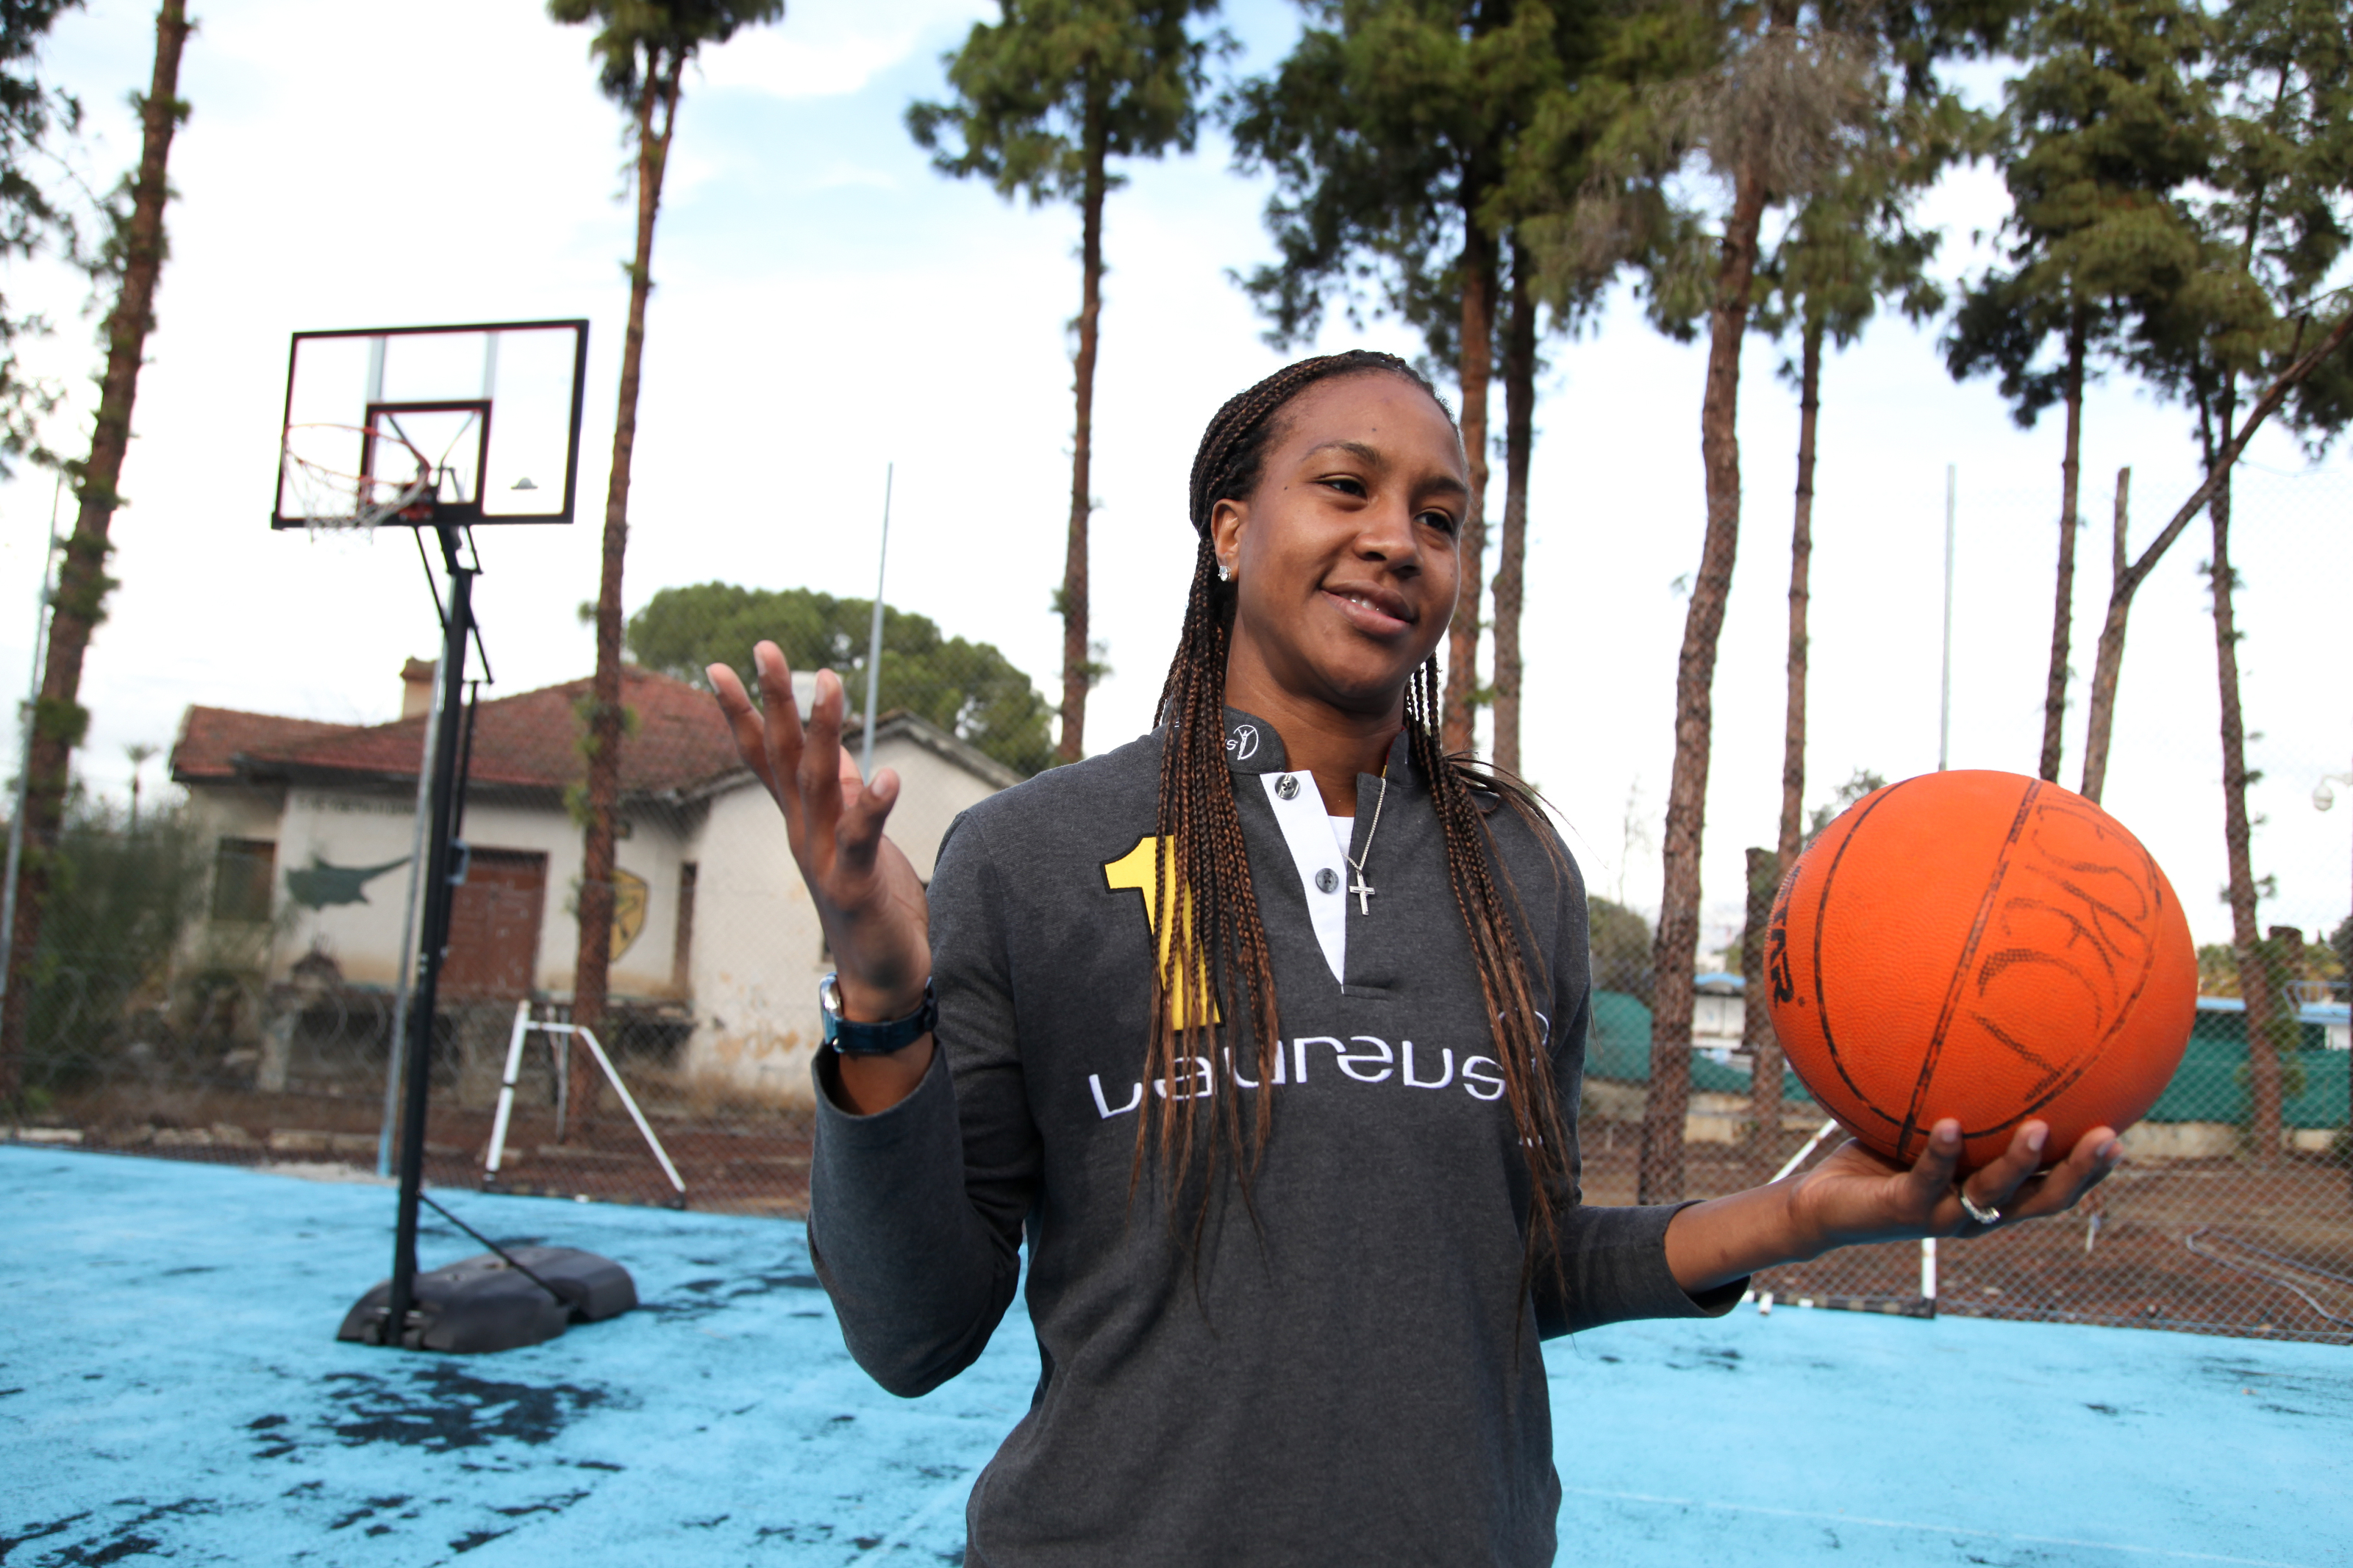 Indiana Fever star Tamika Catchings goes into Basketball Hall of Fame